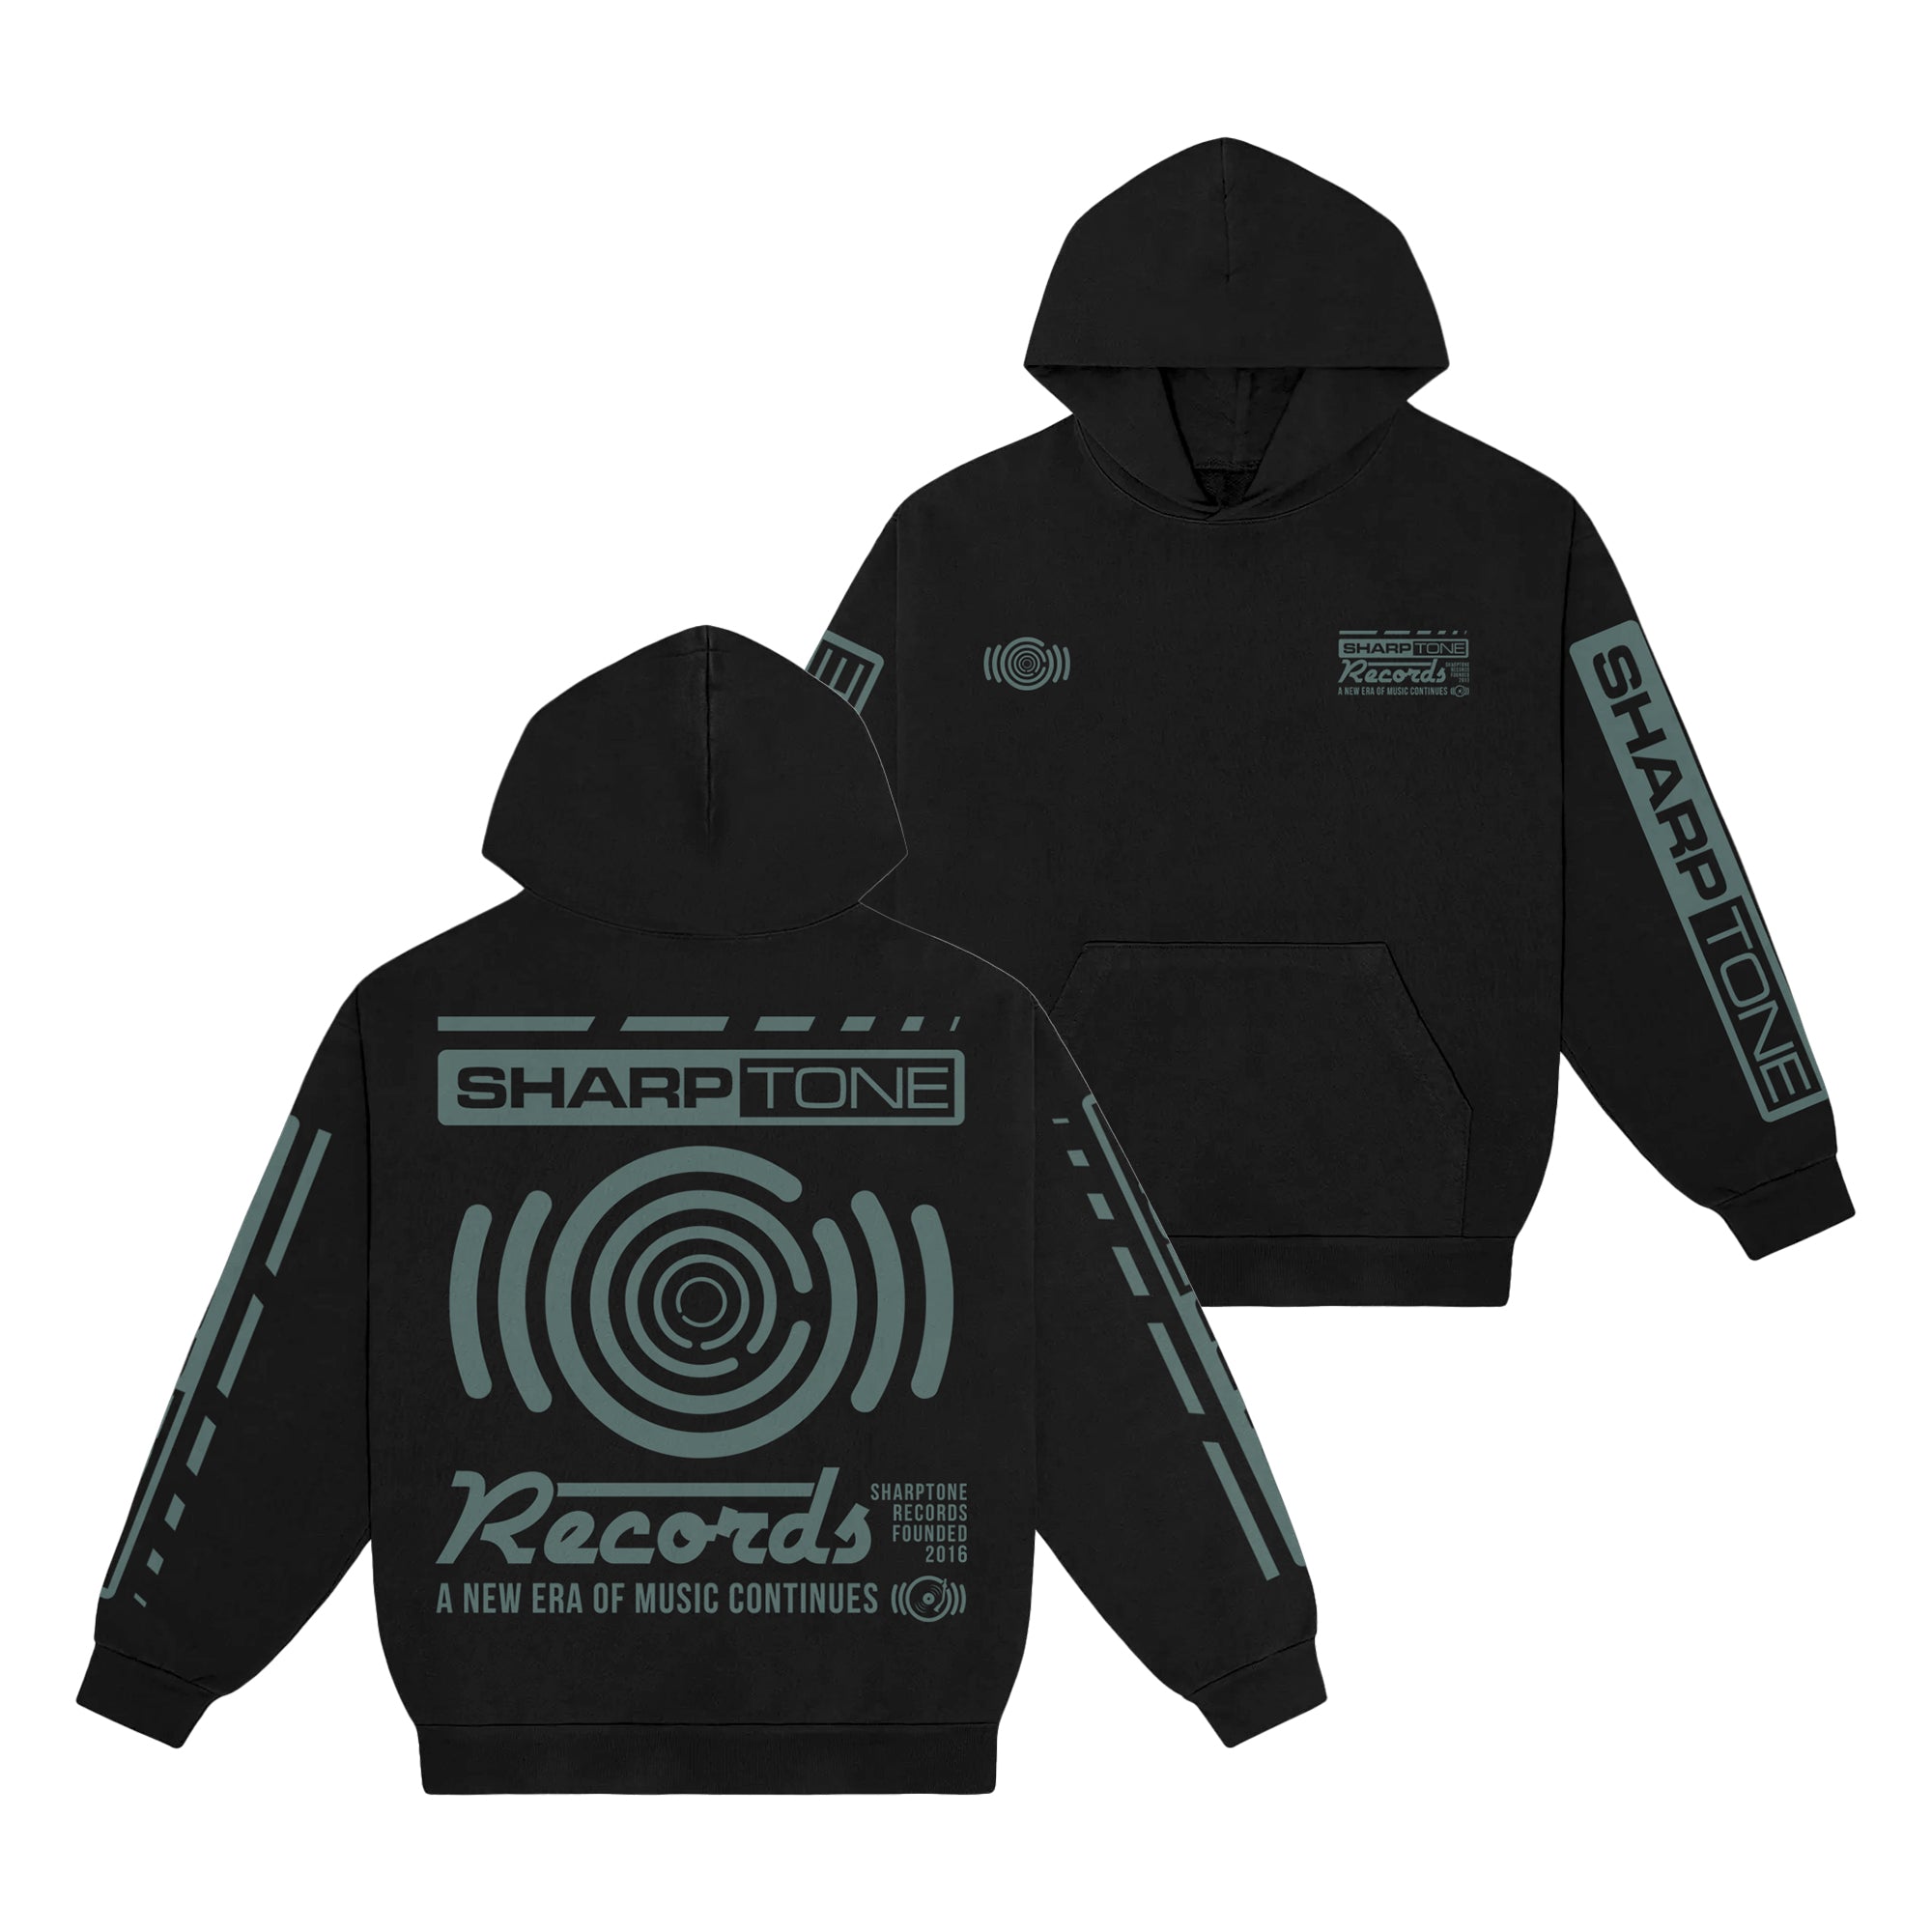 SharpTone Records - A New Era Continues Hoodie